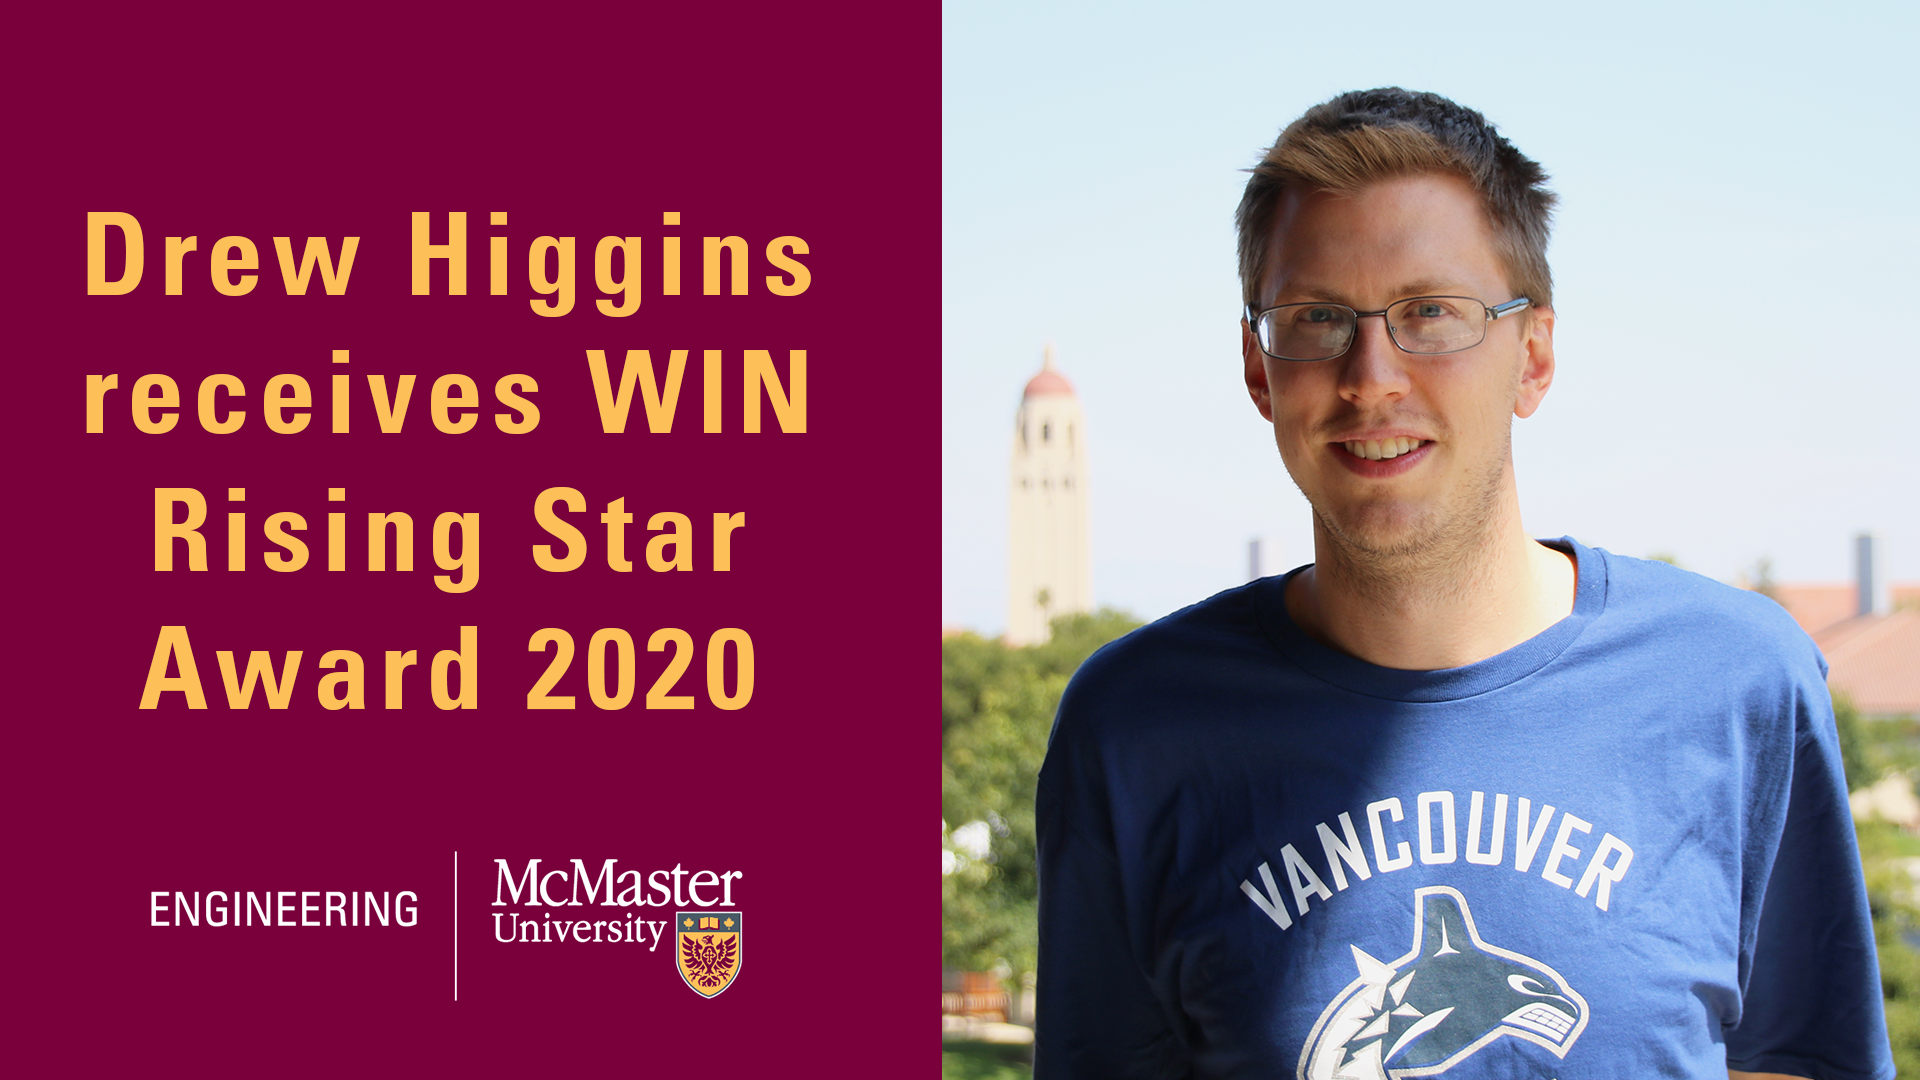 Drew Higgins recognized for outstanding contributions to nanotechnology research